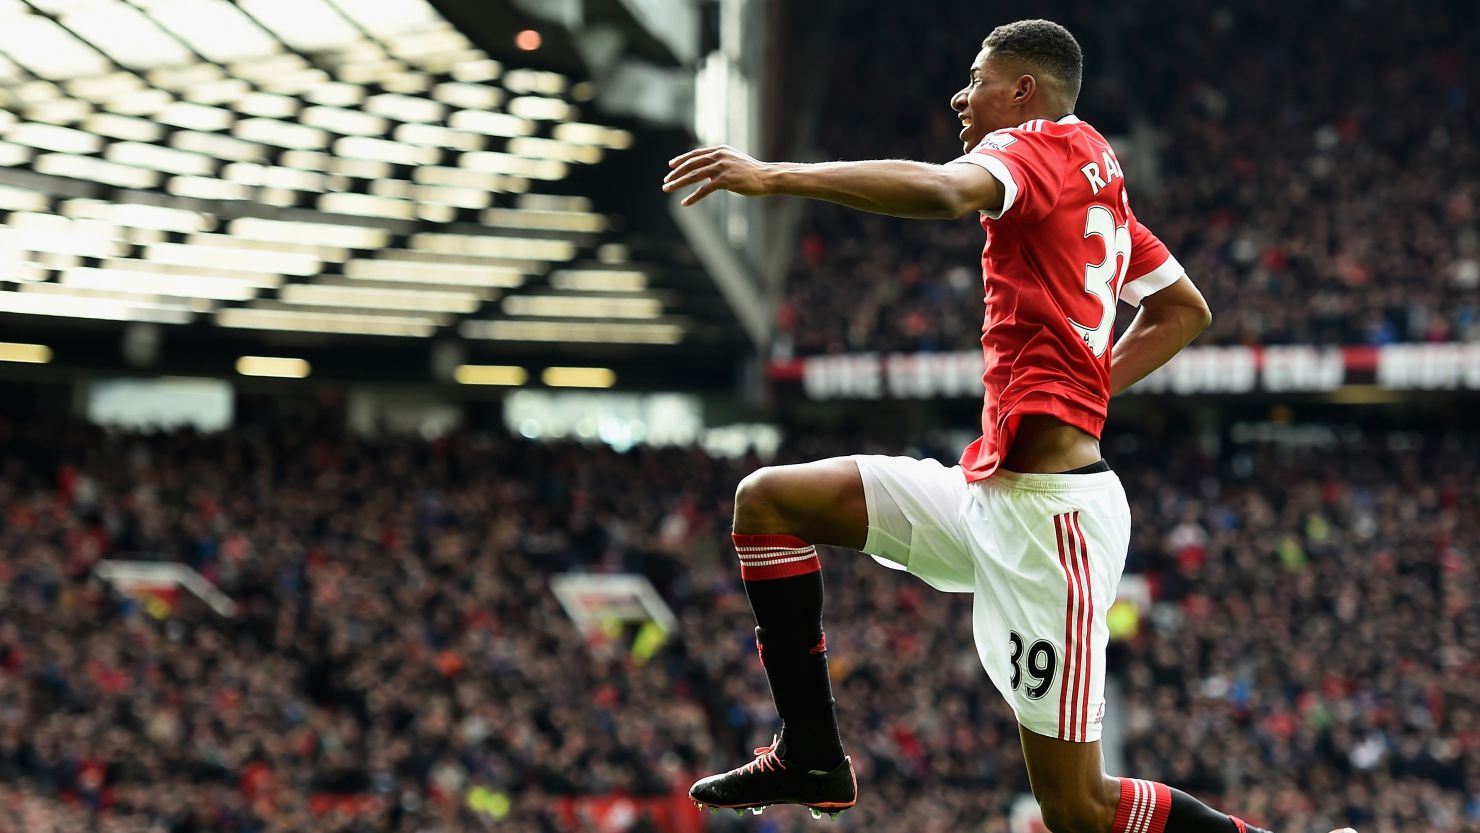 High flyer: Marcus Rashford celebrates scoring the opening goal for Manchester United at Old Trafford.